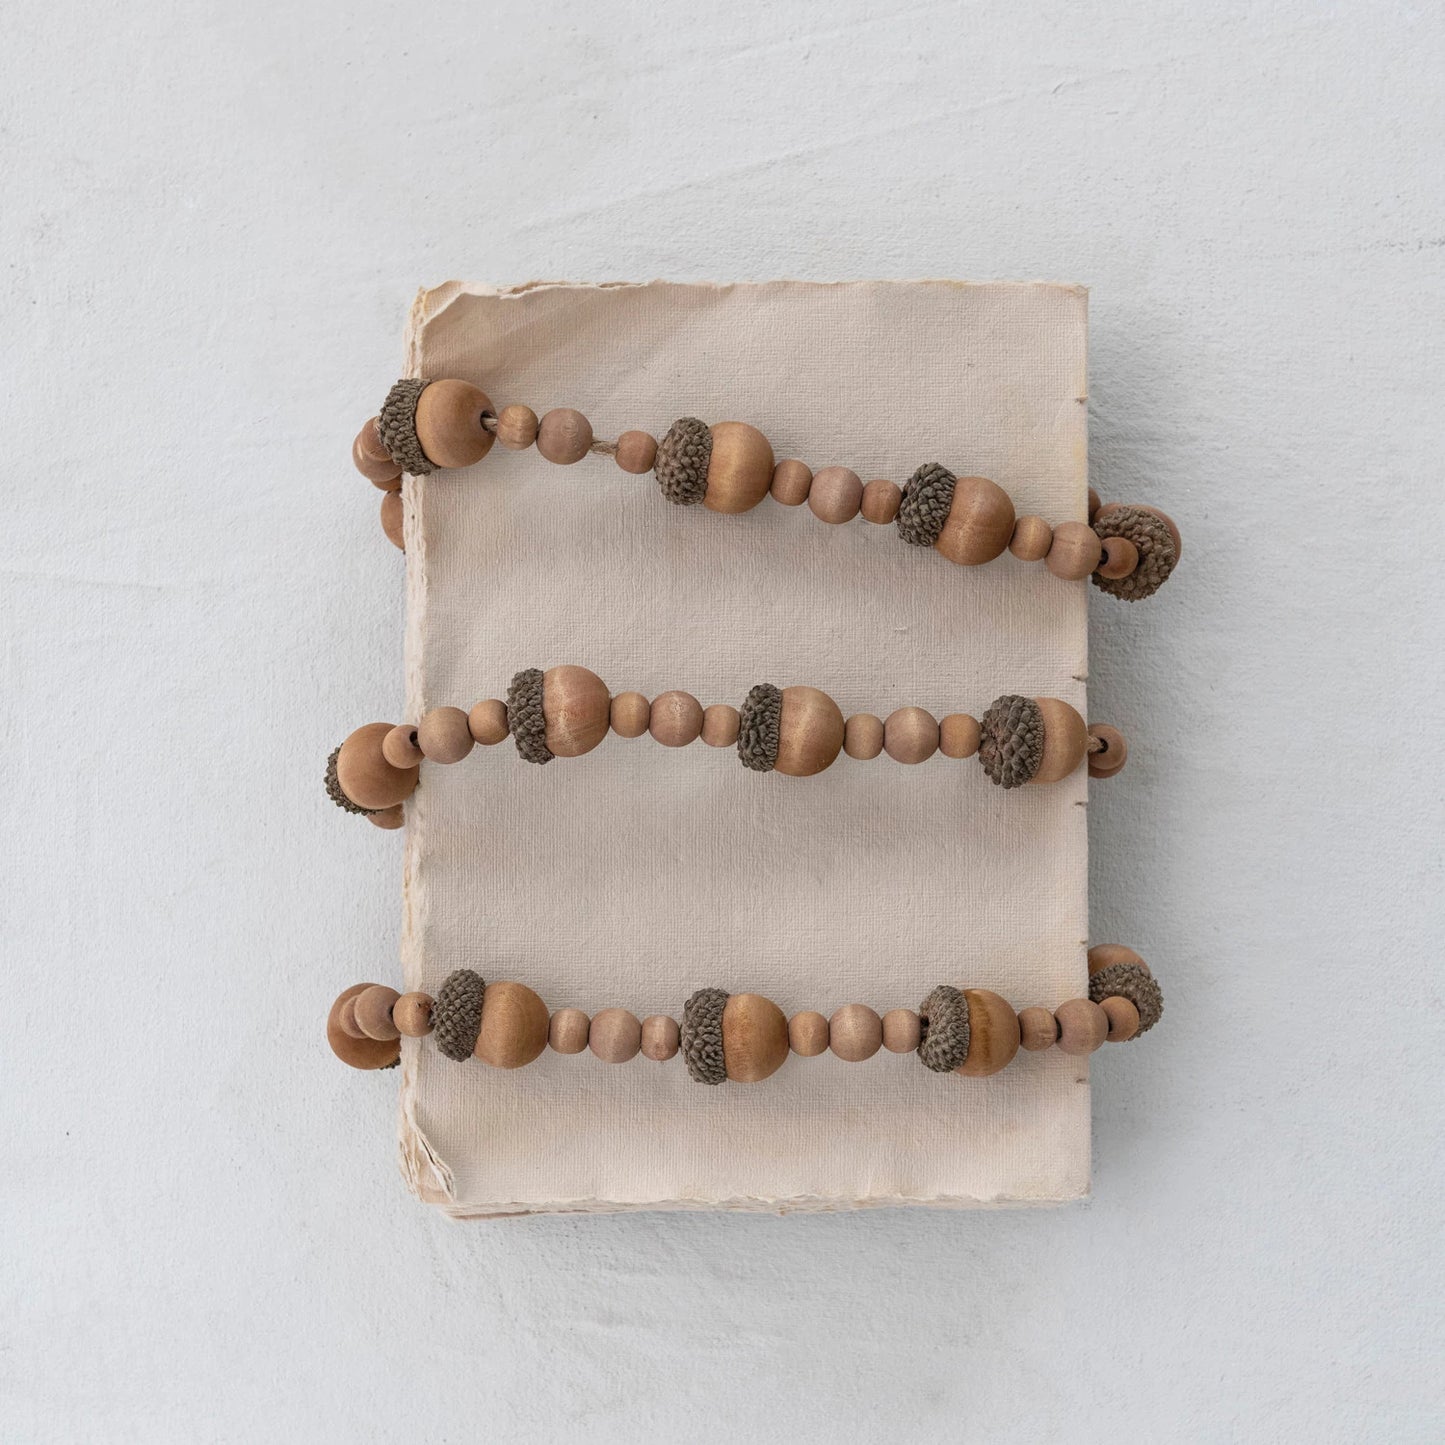 paulownia wood acorn and bead garland wrapped around a stack of recycled paper and displayed on a light surface